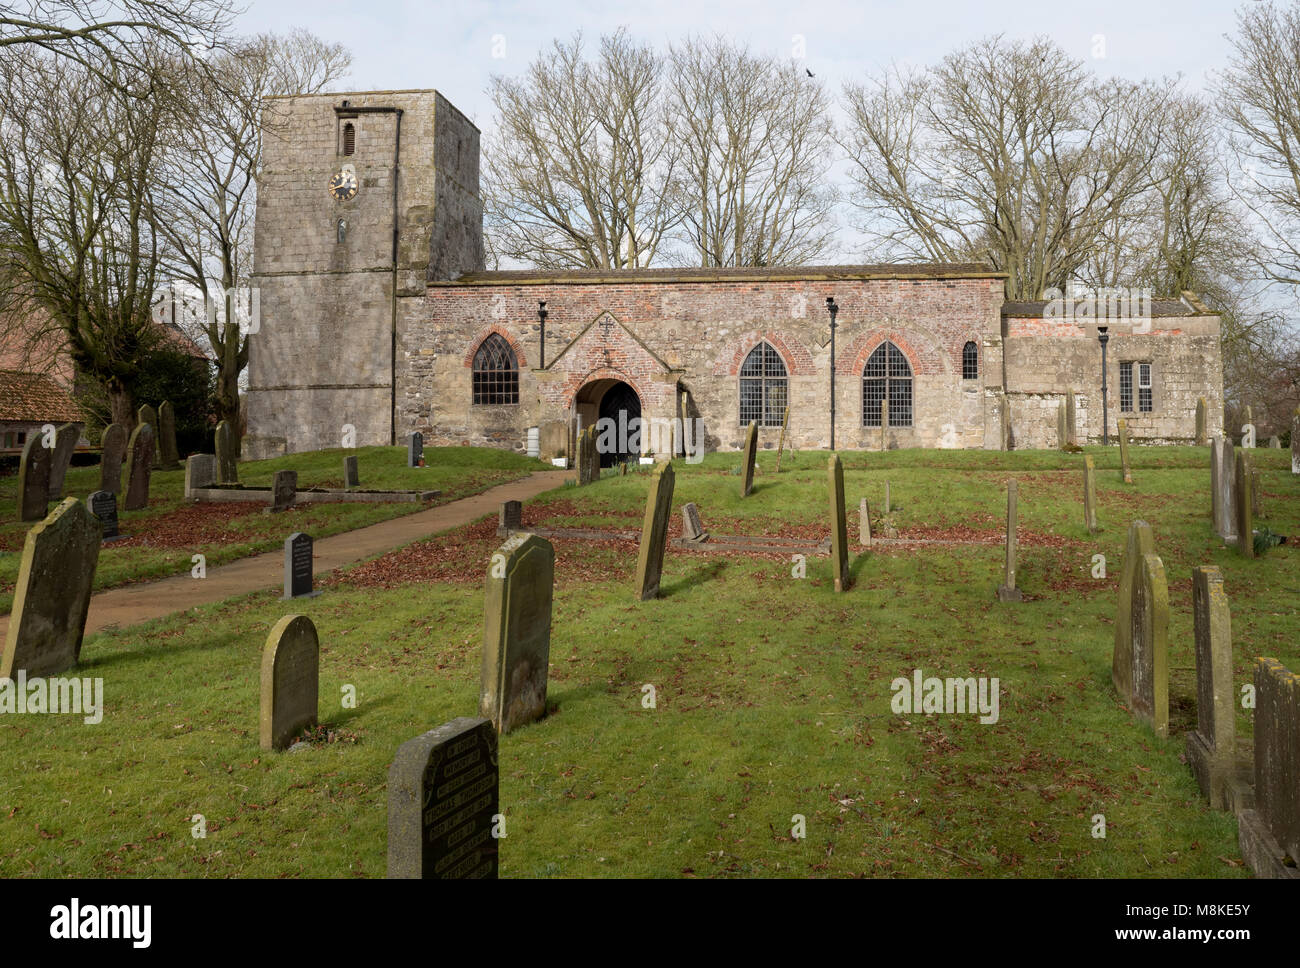 St Cuthbert's chiesa parrocchiale, Burton Fleming, Driffield, East Riding of Yorkshire, Yorkshire, Inghilterra, Regno Unito. Foto Stock